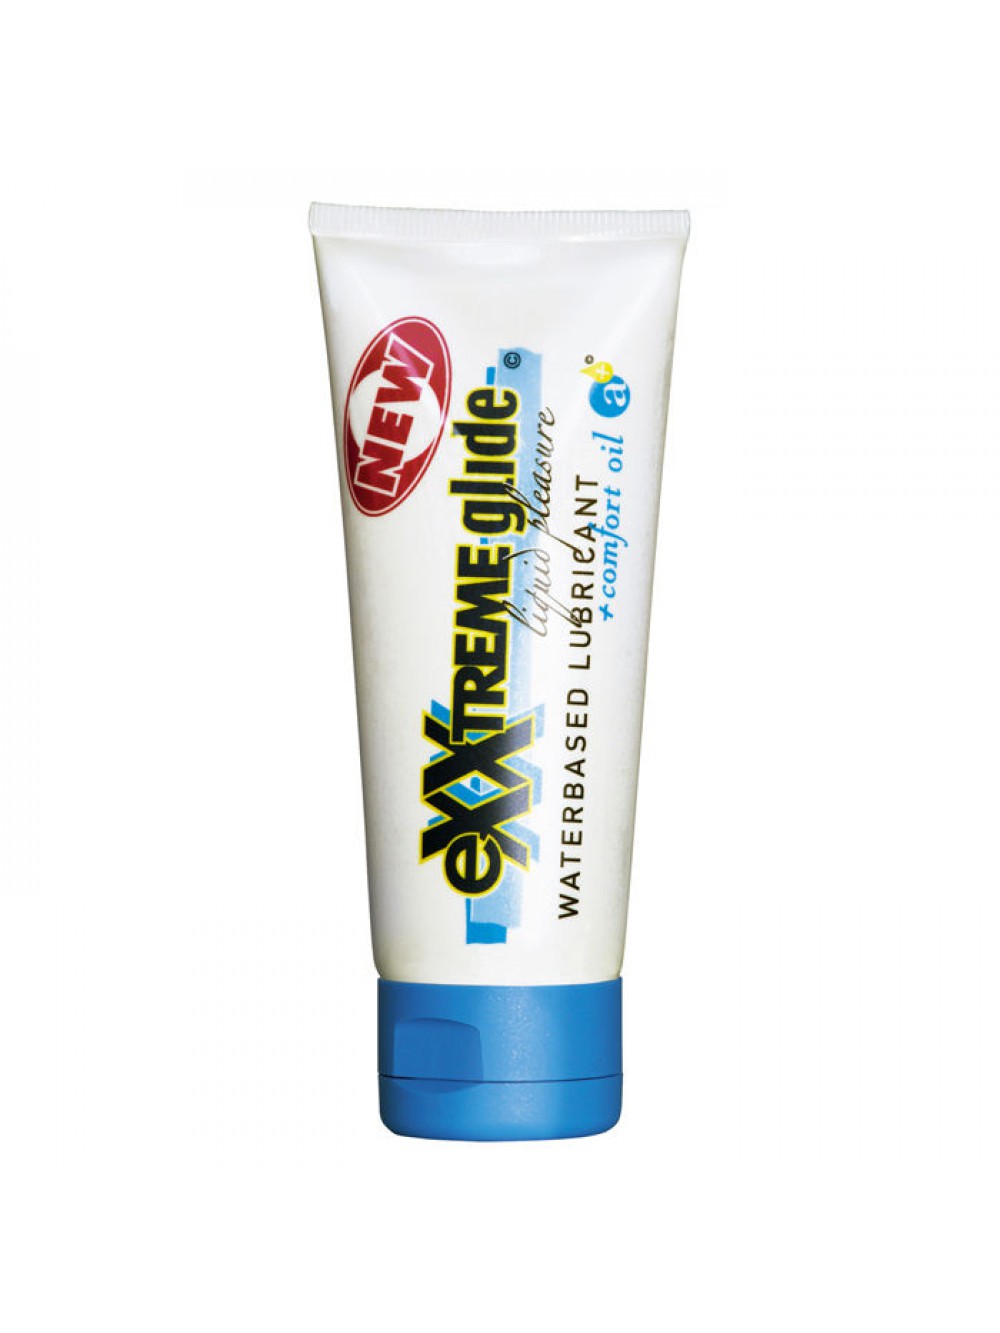 HOT EXXTREME GLIDE WATERBASED LUBRICANT 100 ML, 4042342000719